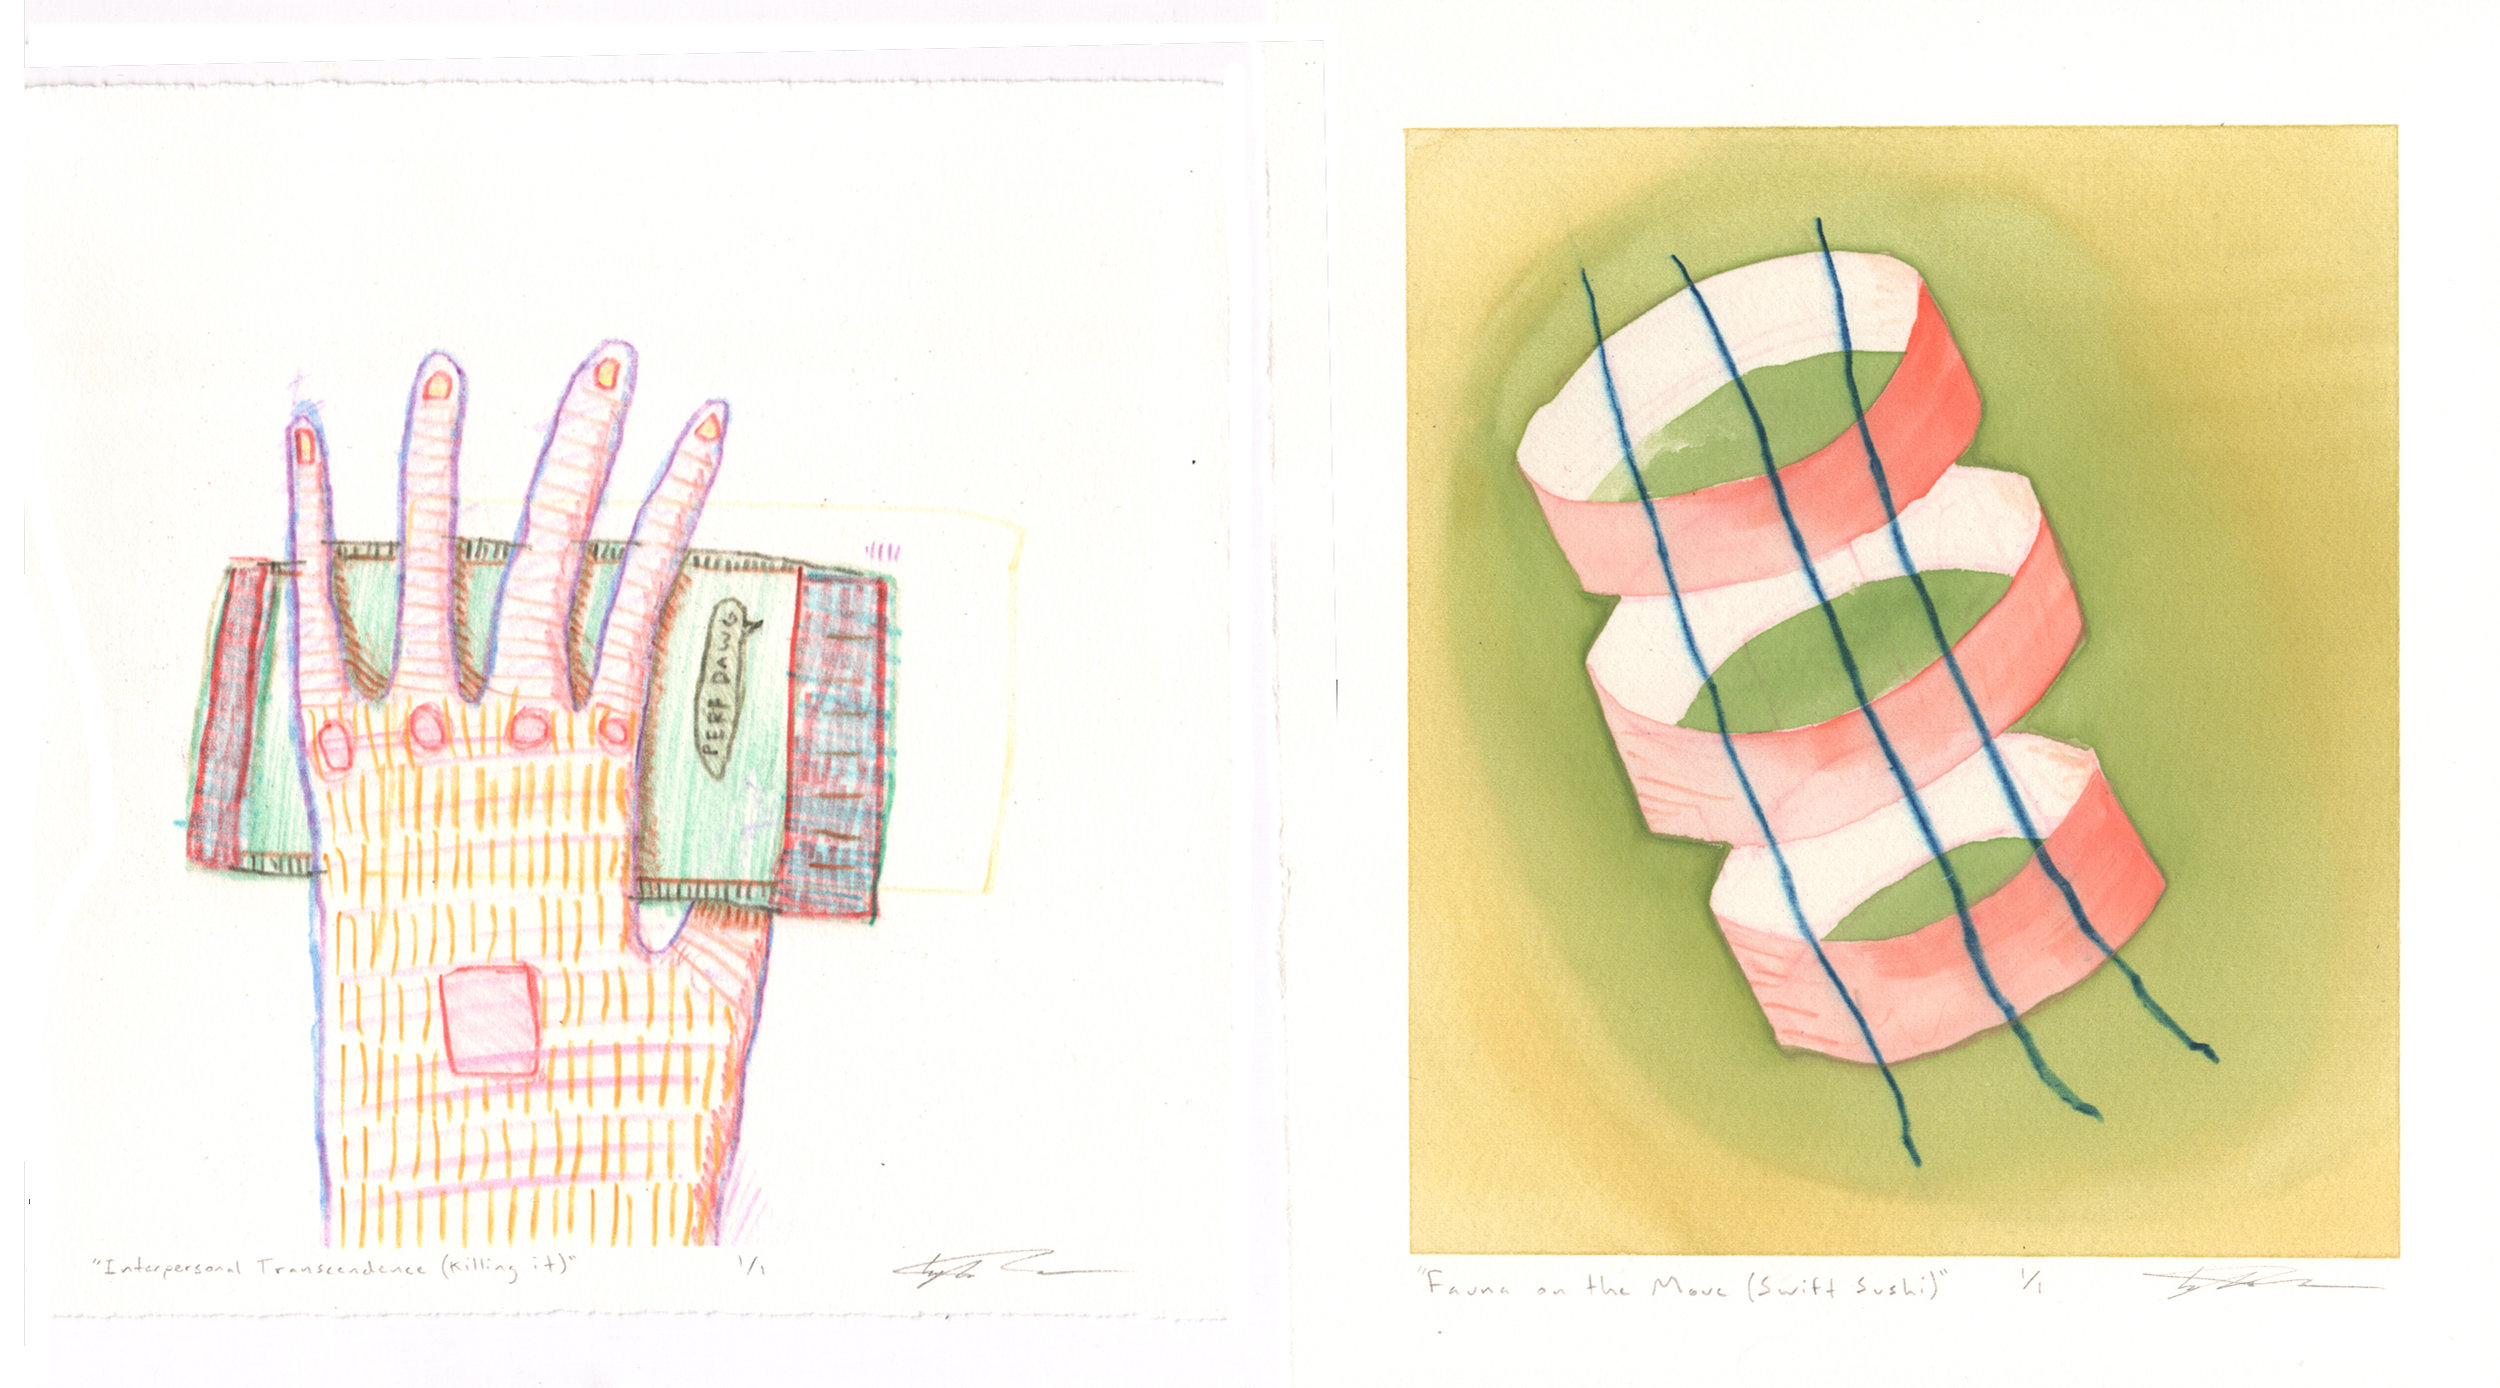 Tyler Green, Left: Interpersonal Transcendence (Killing It), Right: Fauna on the Move (Swift Sushi), monotype